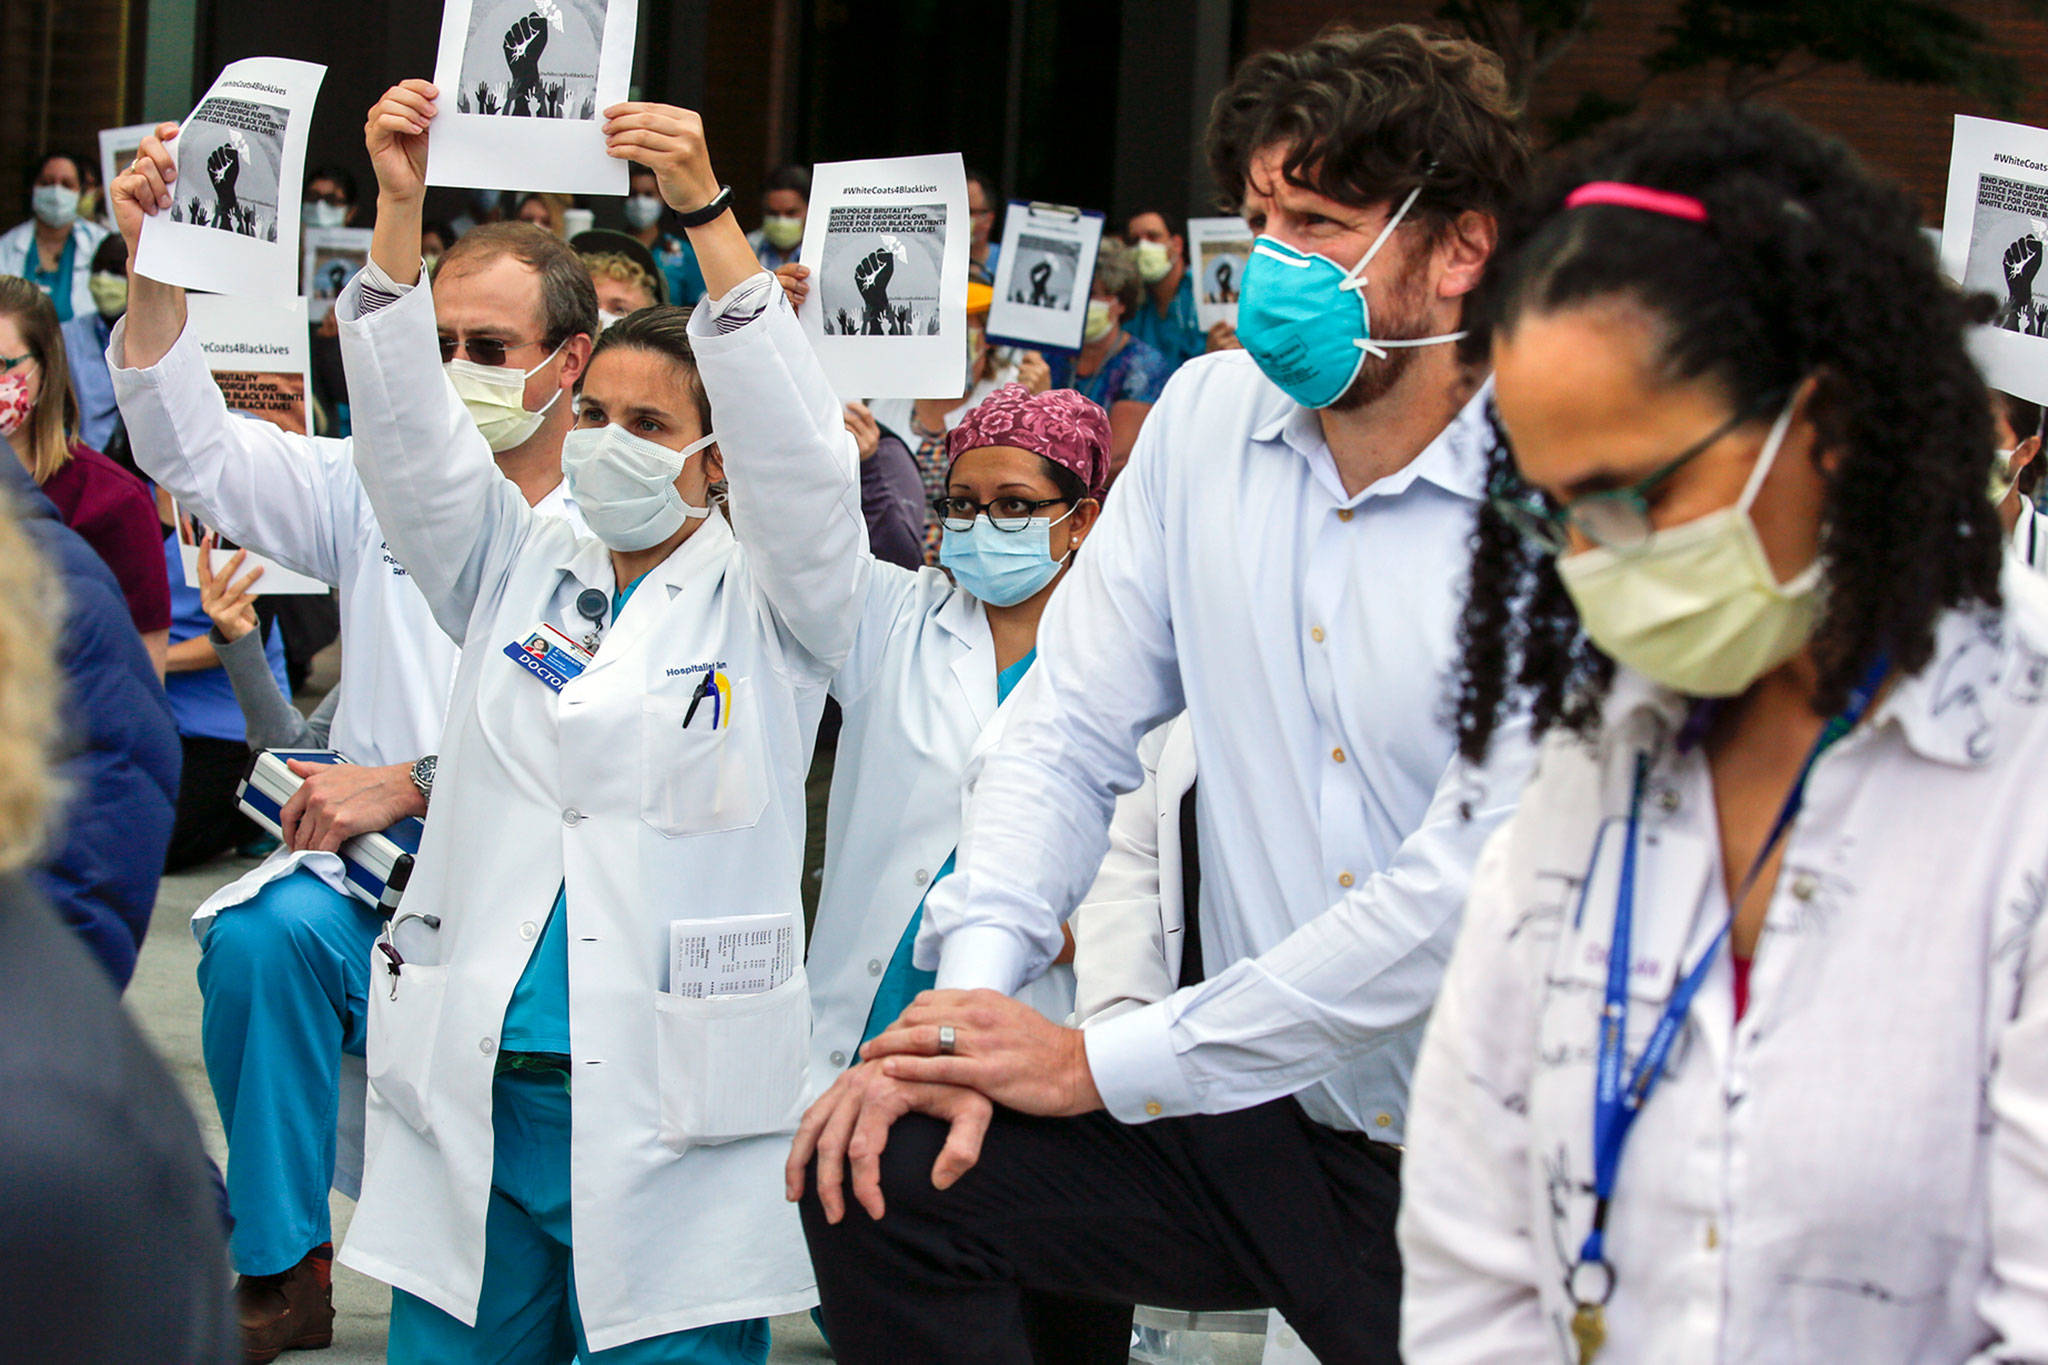 Health care workers take a knee for 10 minutes as part of White Coats 4 Black Lives at Providence RegionalMedical Center on Friday morning. (Kevin Clark / The Herald)